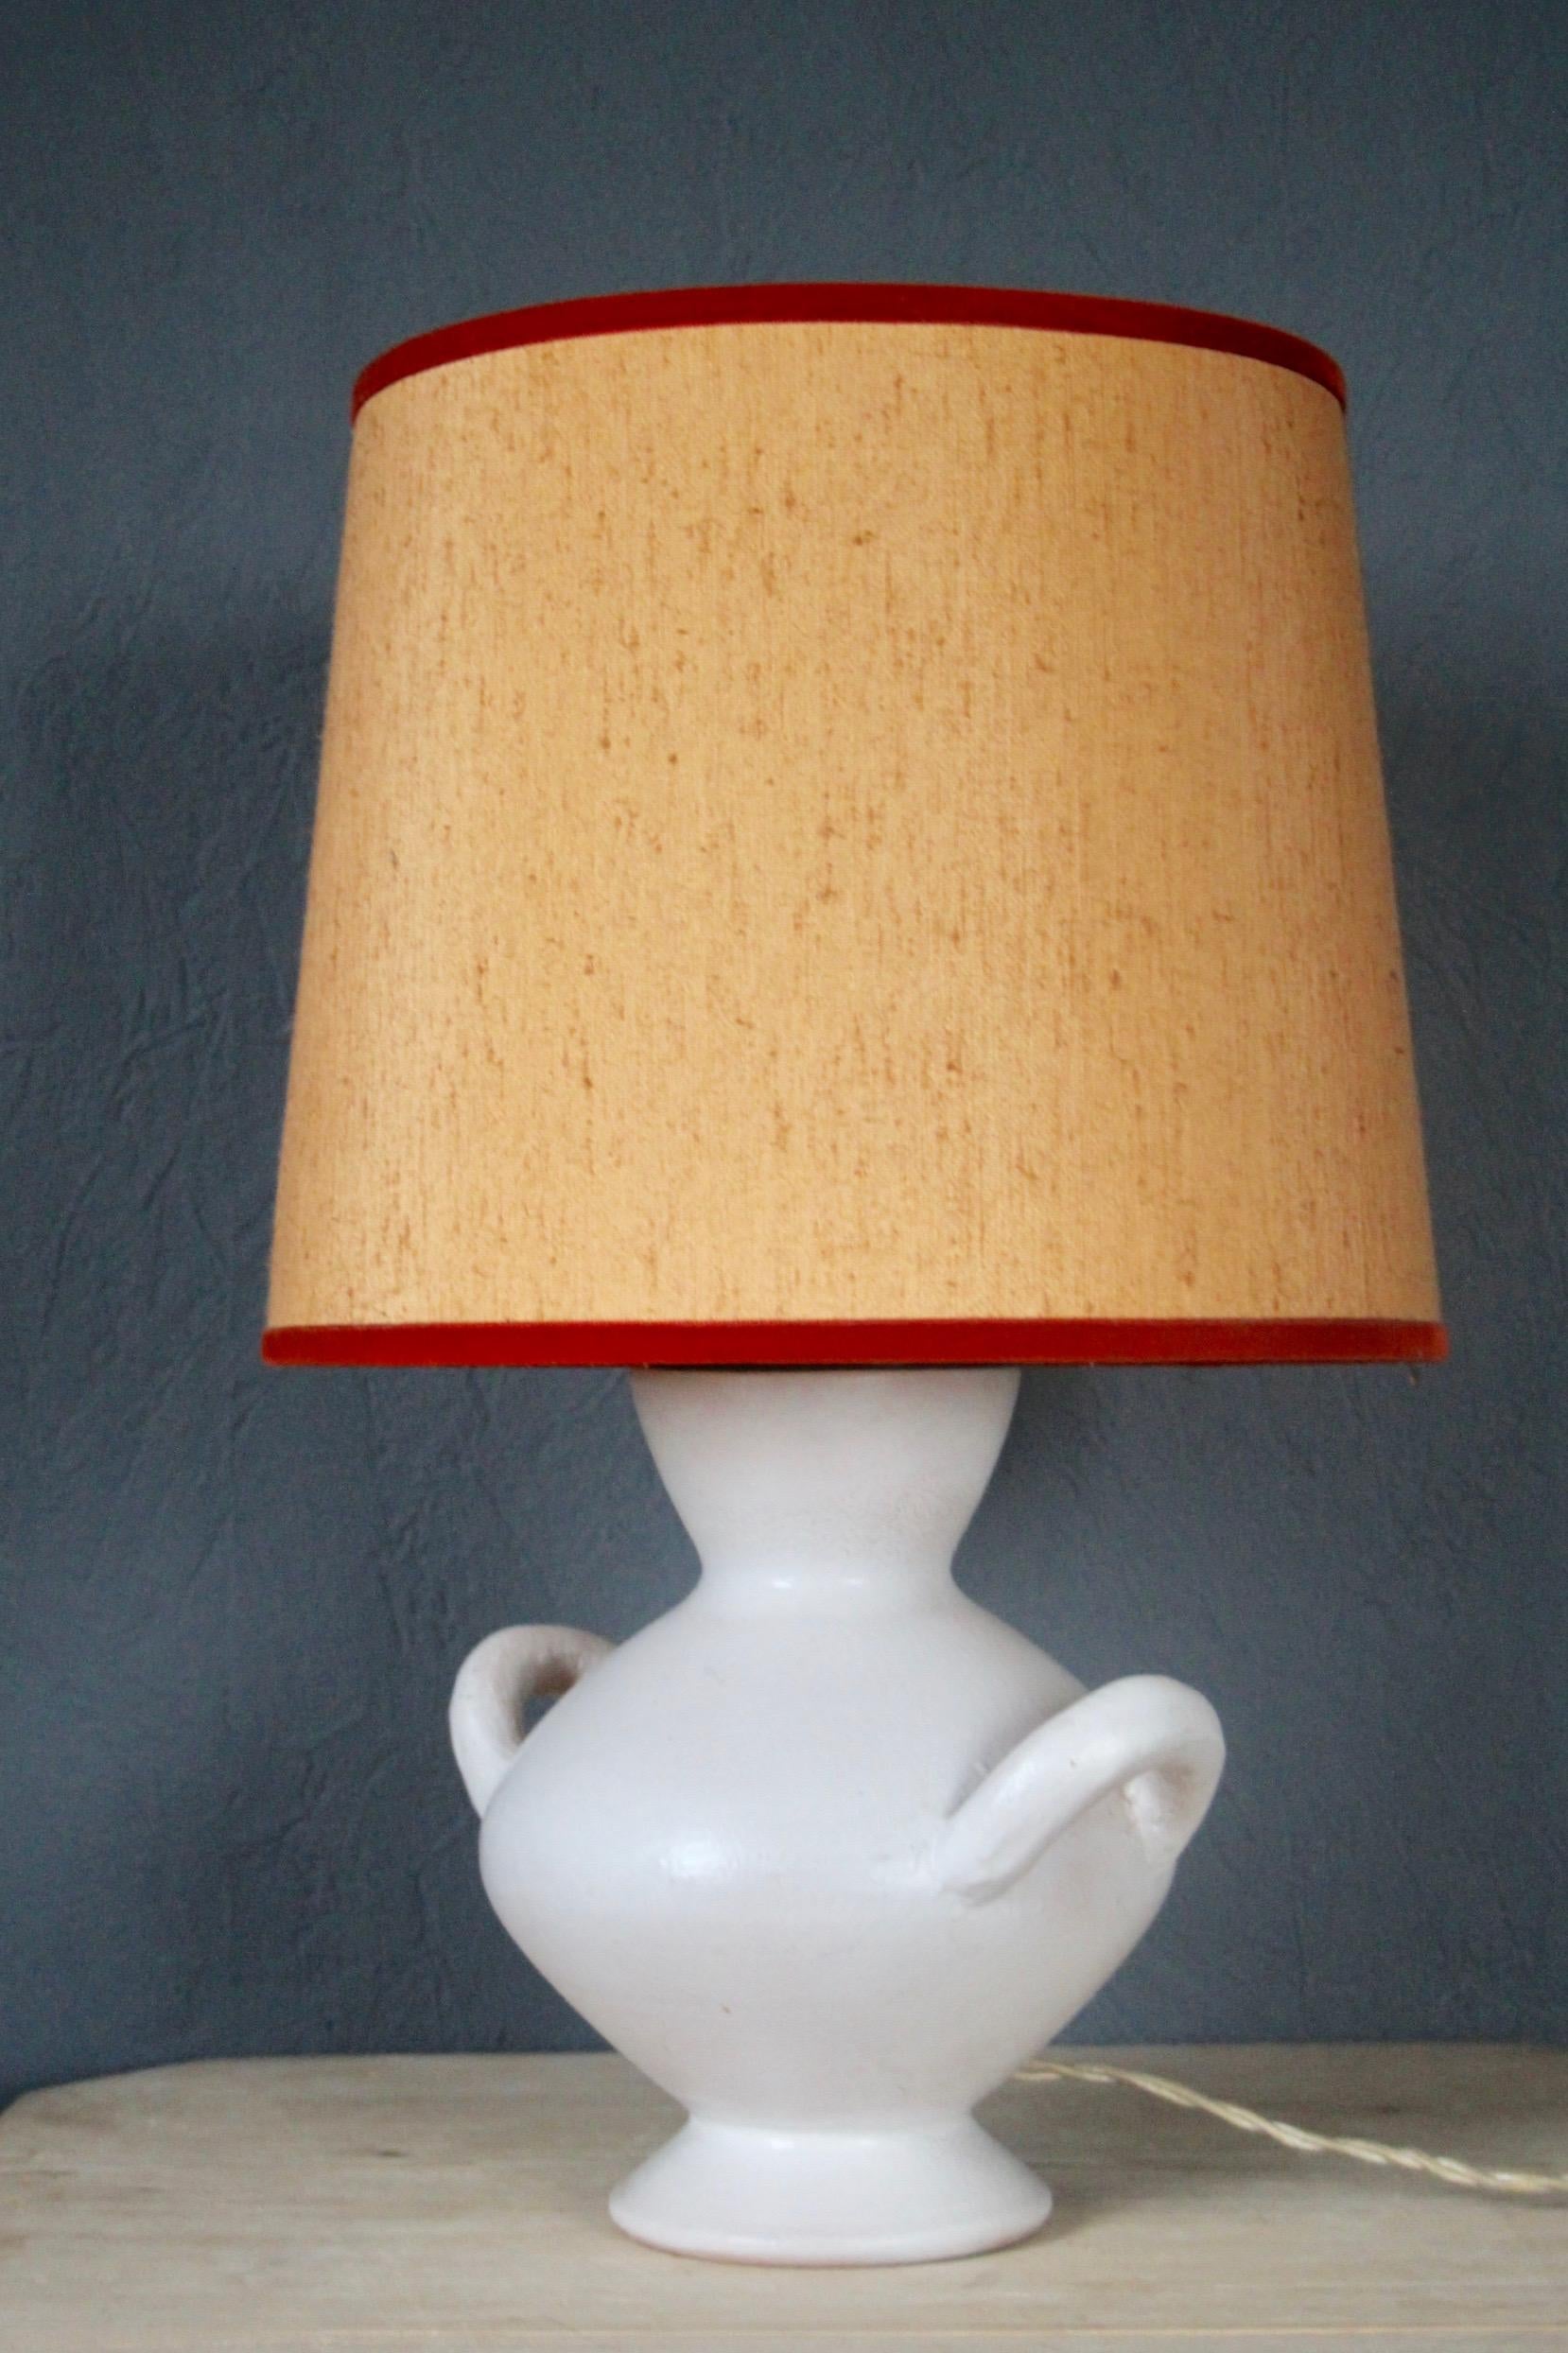 White ceramic table lamp, small damage on the shade, dimensions with out shade H 33 diam 20 cm.